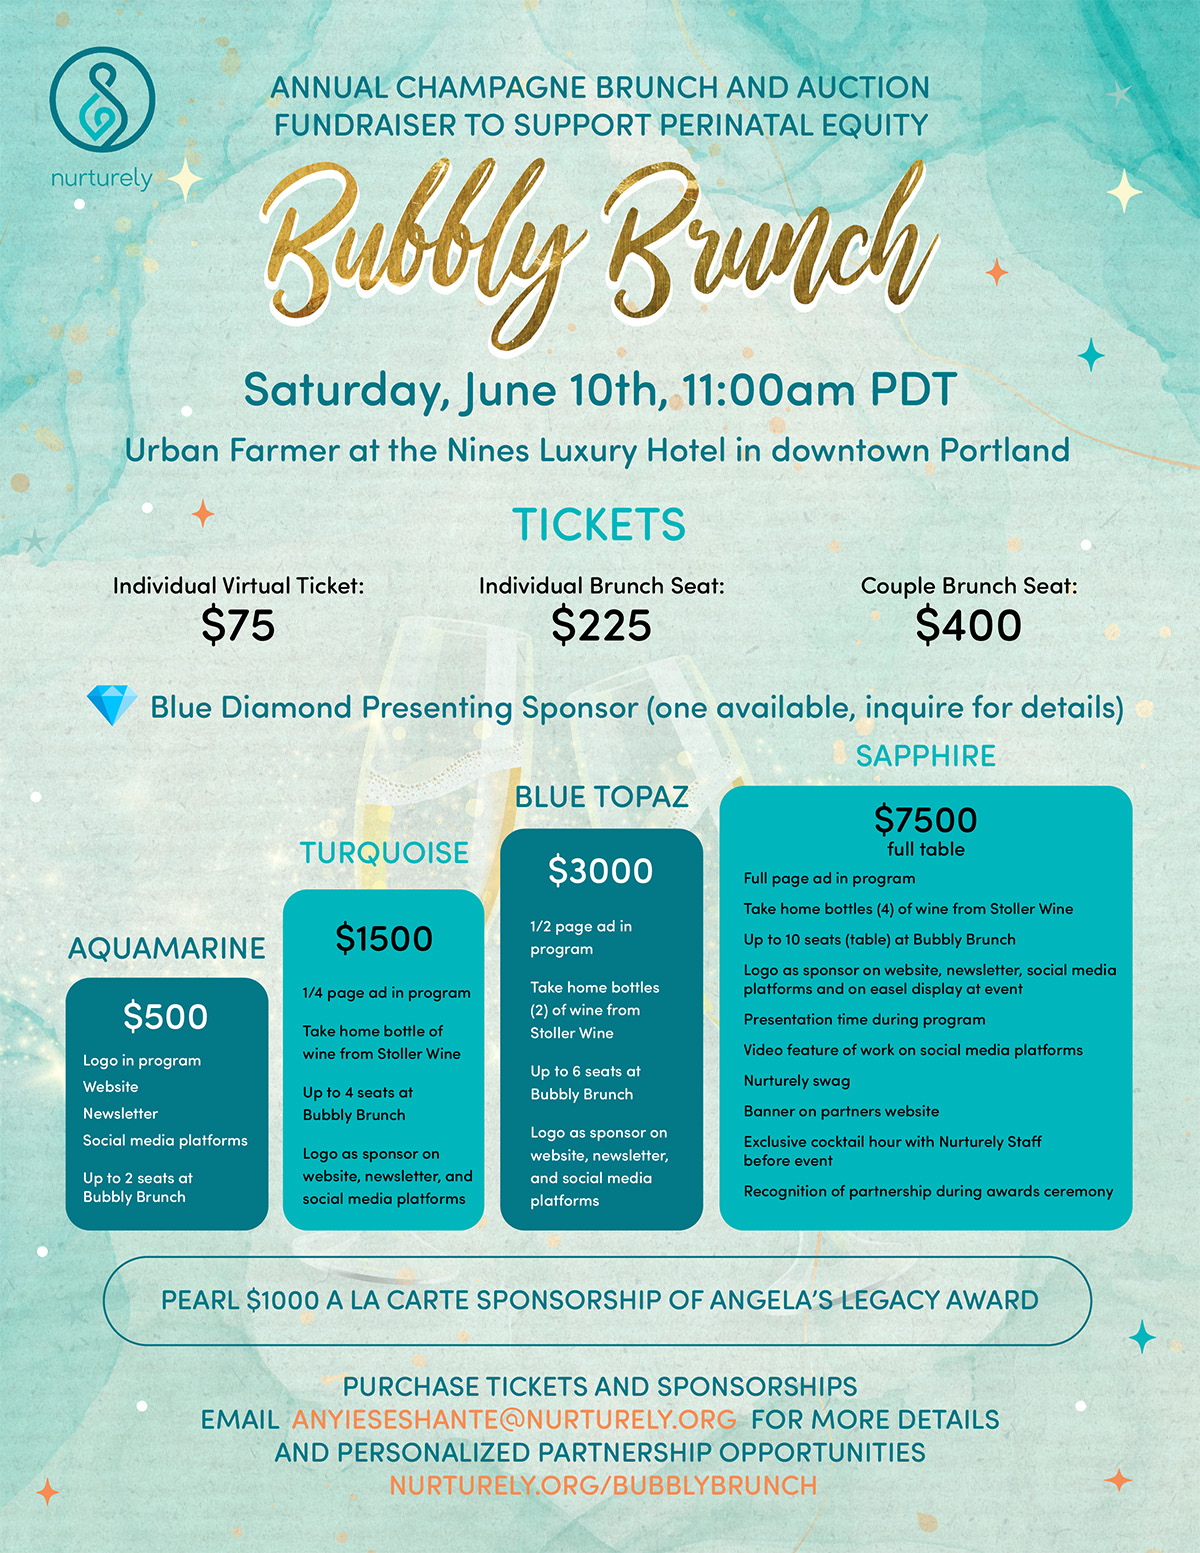 Bubbly Brunch Ticket Pricing details